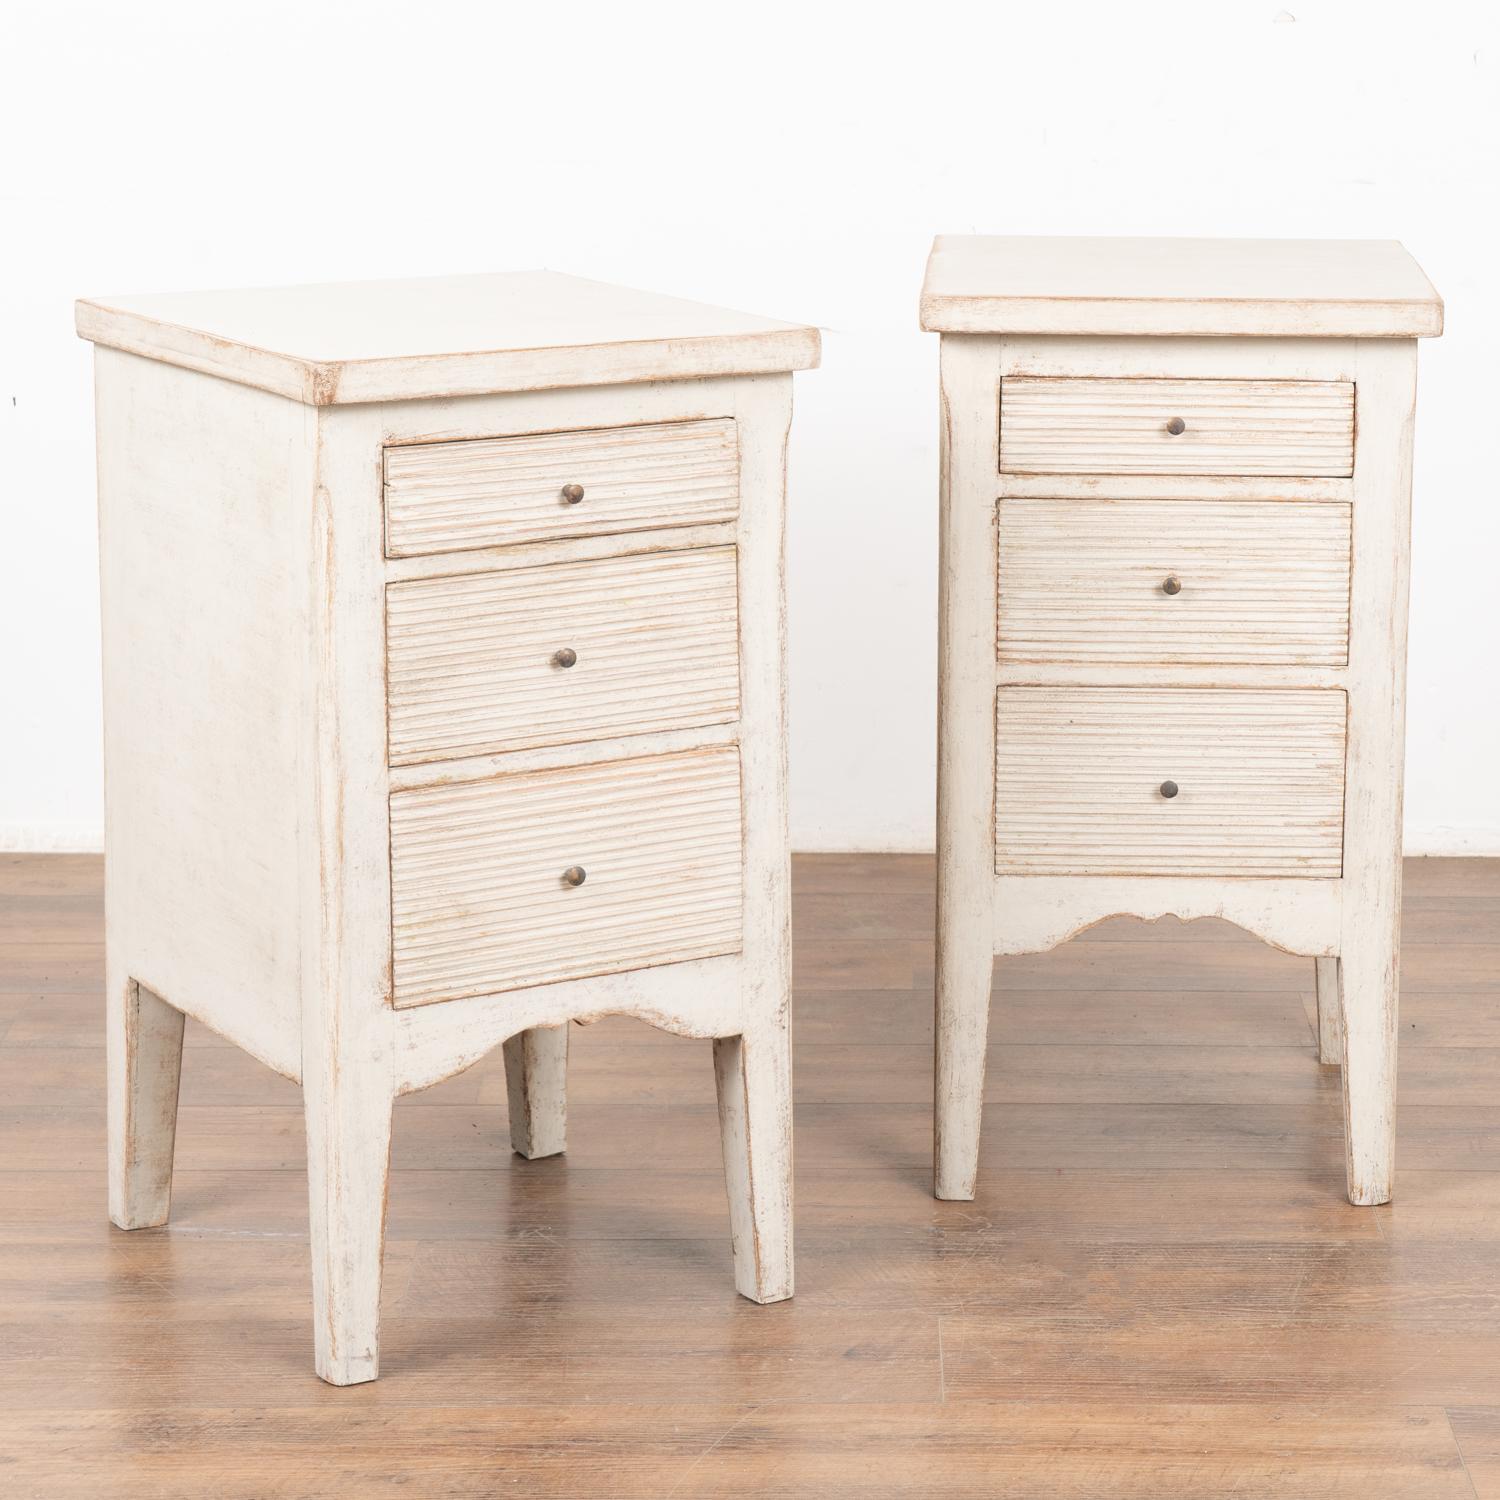 Pair, Gustavian style small pine chest of drawers with fluted drawers perfect to use as nightstands or small side tables. 
Note the top is hinged, revealing hidden storage within. The three drawers each have two brass pulls to open.
The newer,